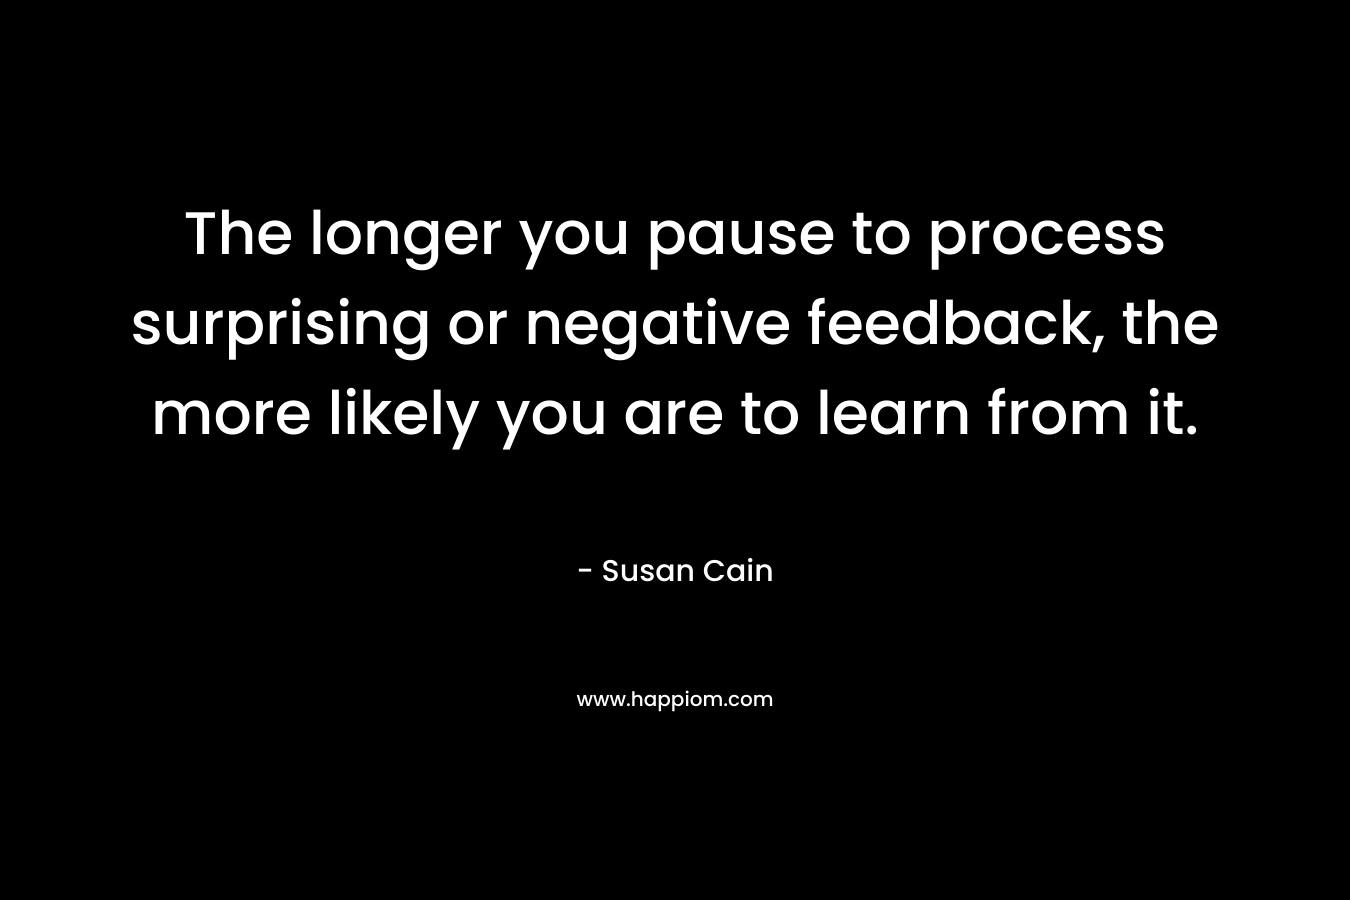 The longer you pause to process surprising or negative feedback, the more likely you are to learn from it.